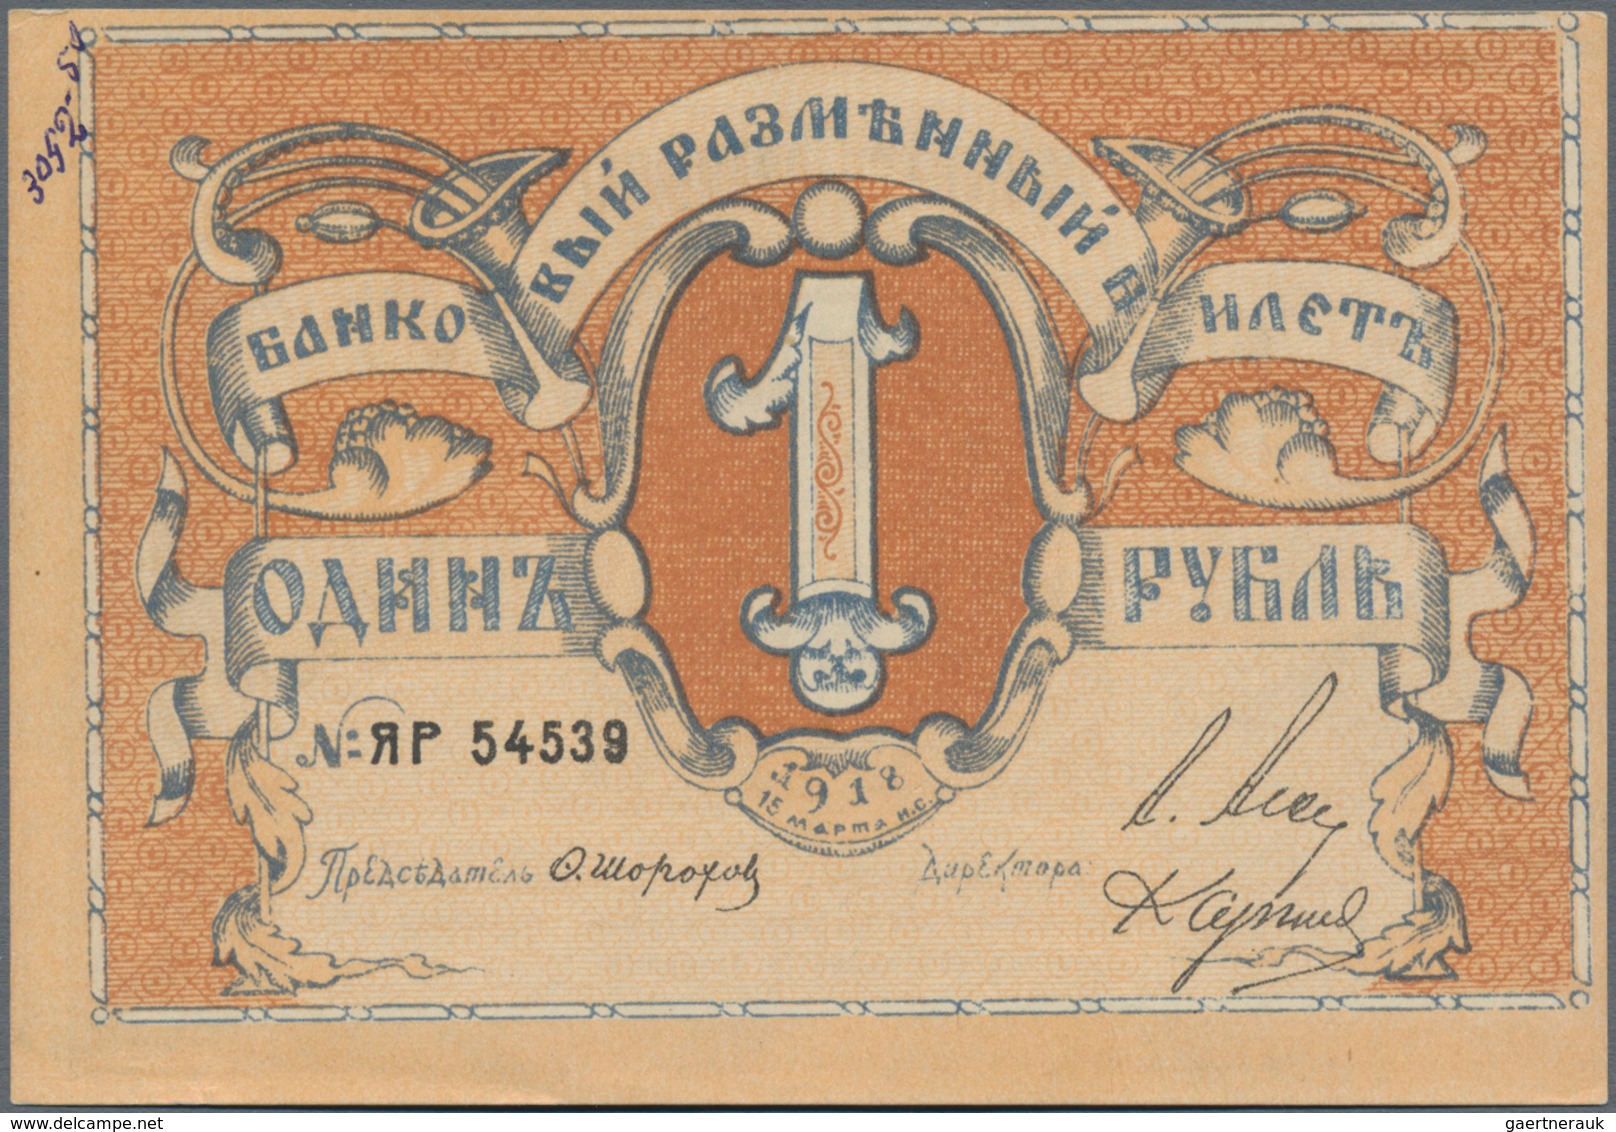 Russia / Russland: Northwest Russia – PSKOV Bank 1 Ruble 1918, P.S212 In UNC Condition. - Russie